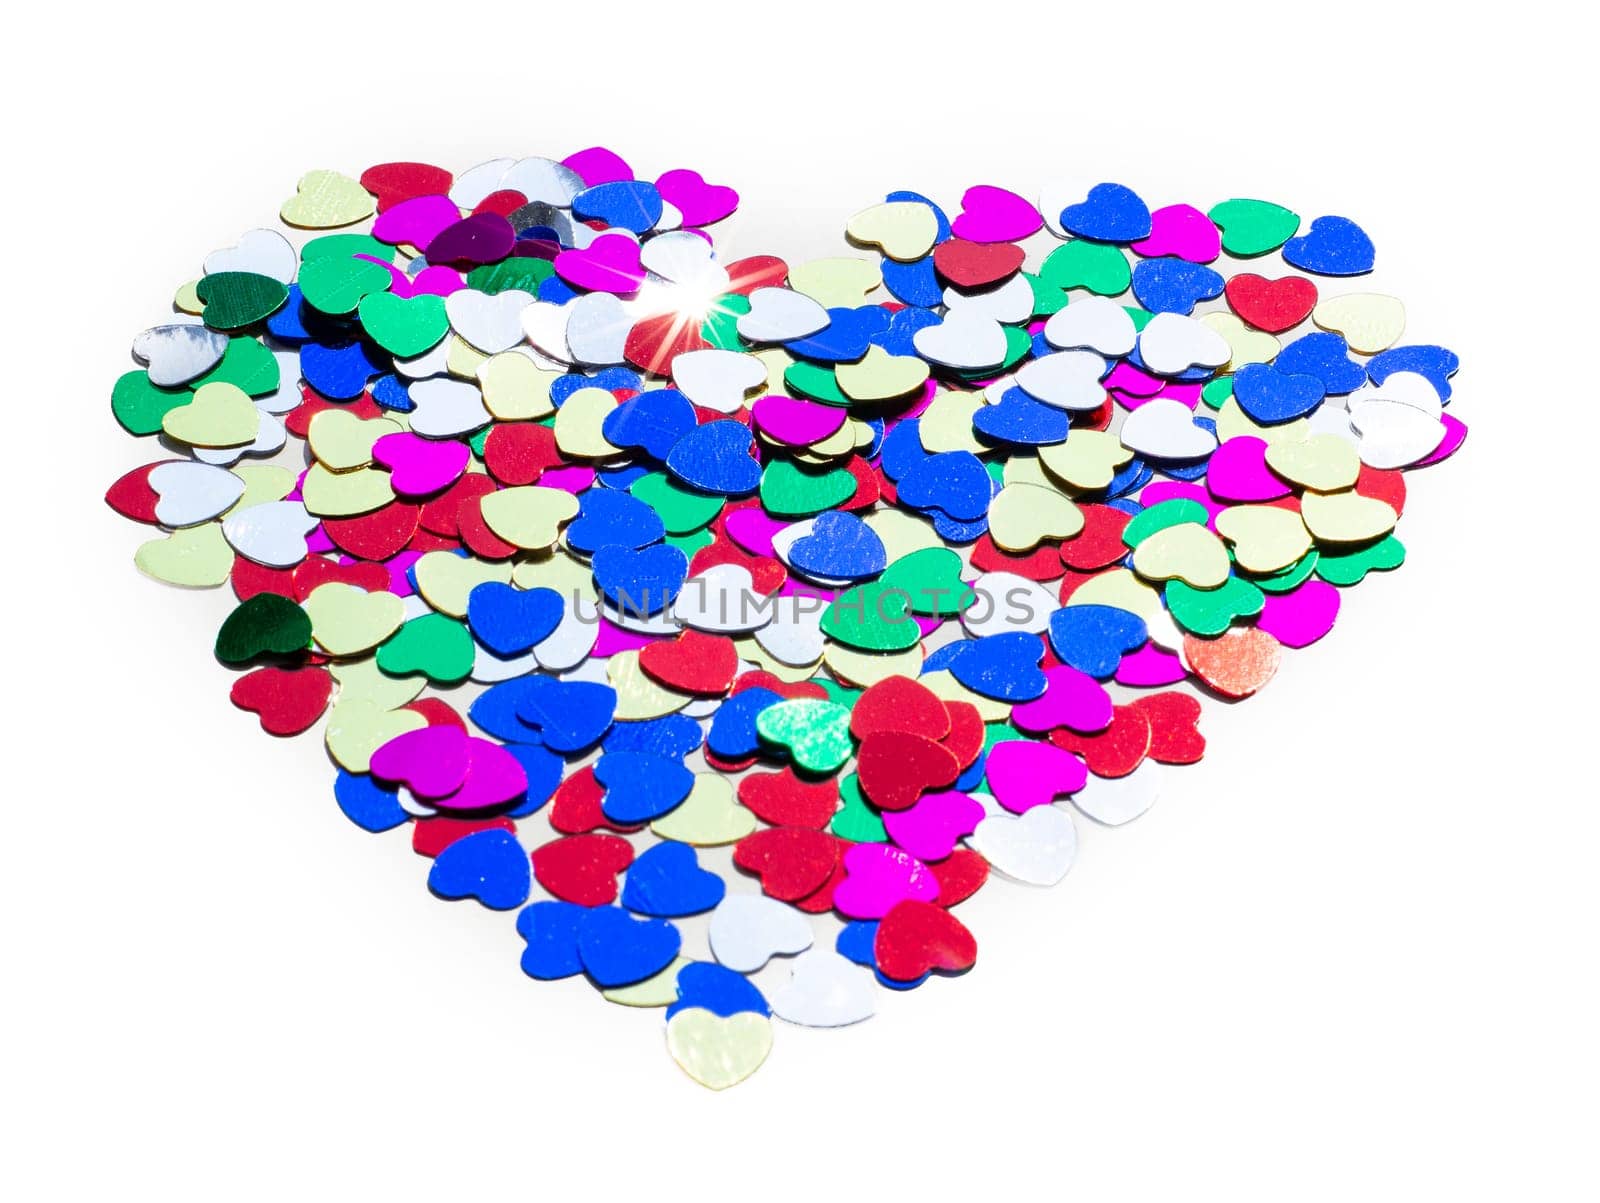 Color hearts on the table for Valentine's Day by lanart